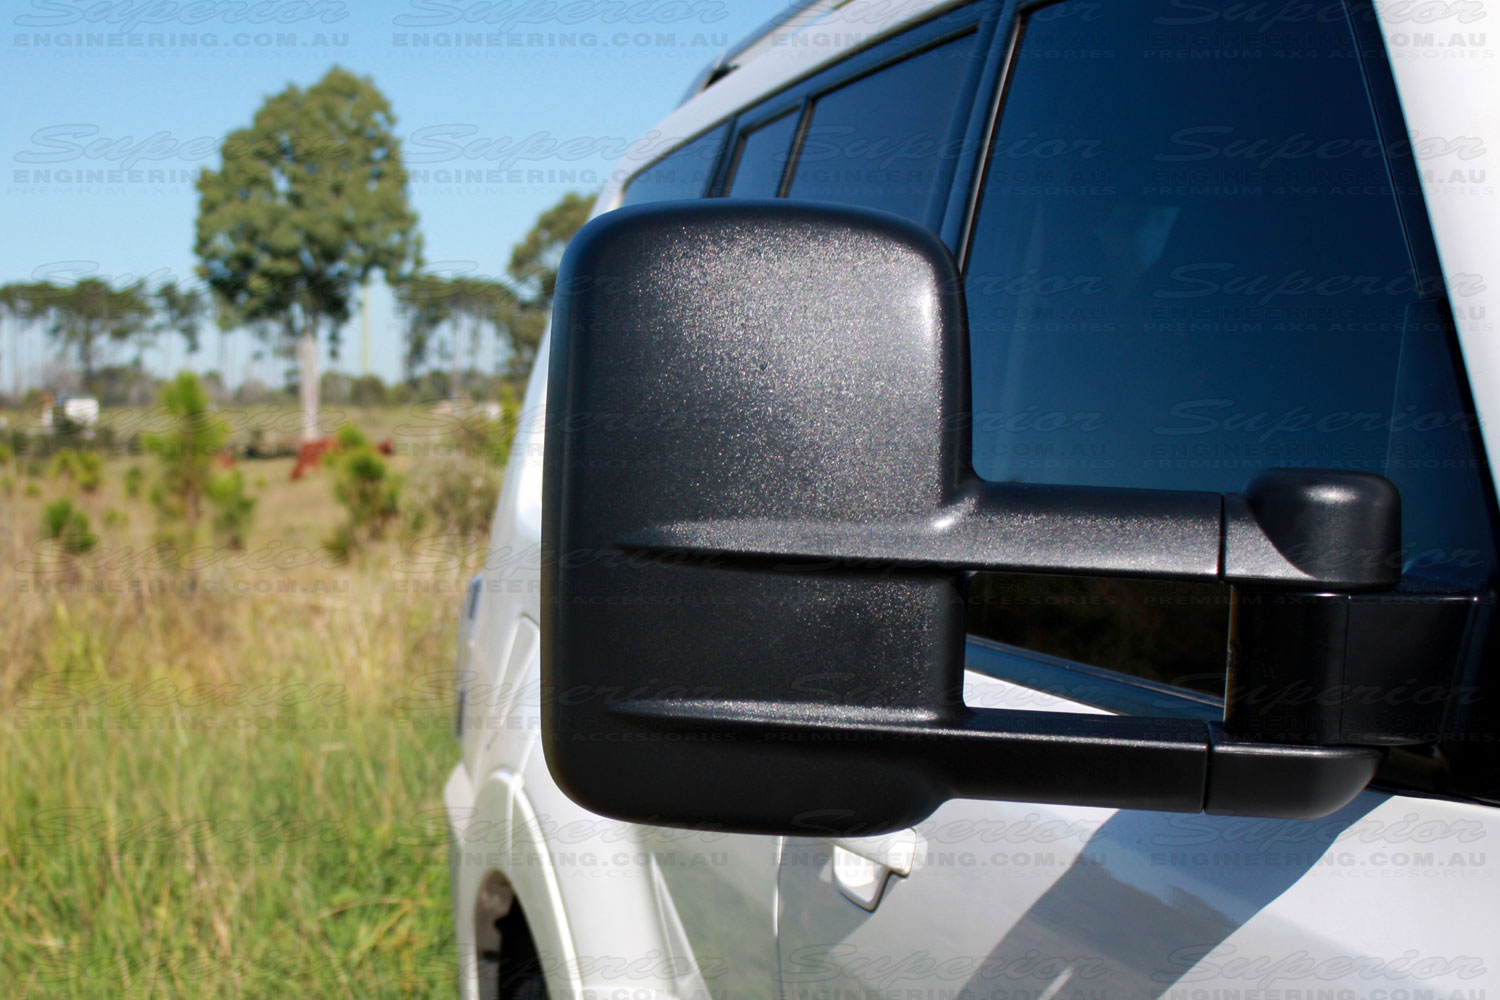 Right front view of a black Mitsubishi Pajero Clearview Towing Mirror